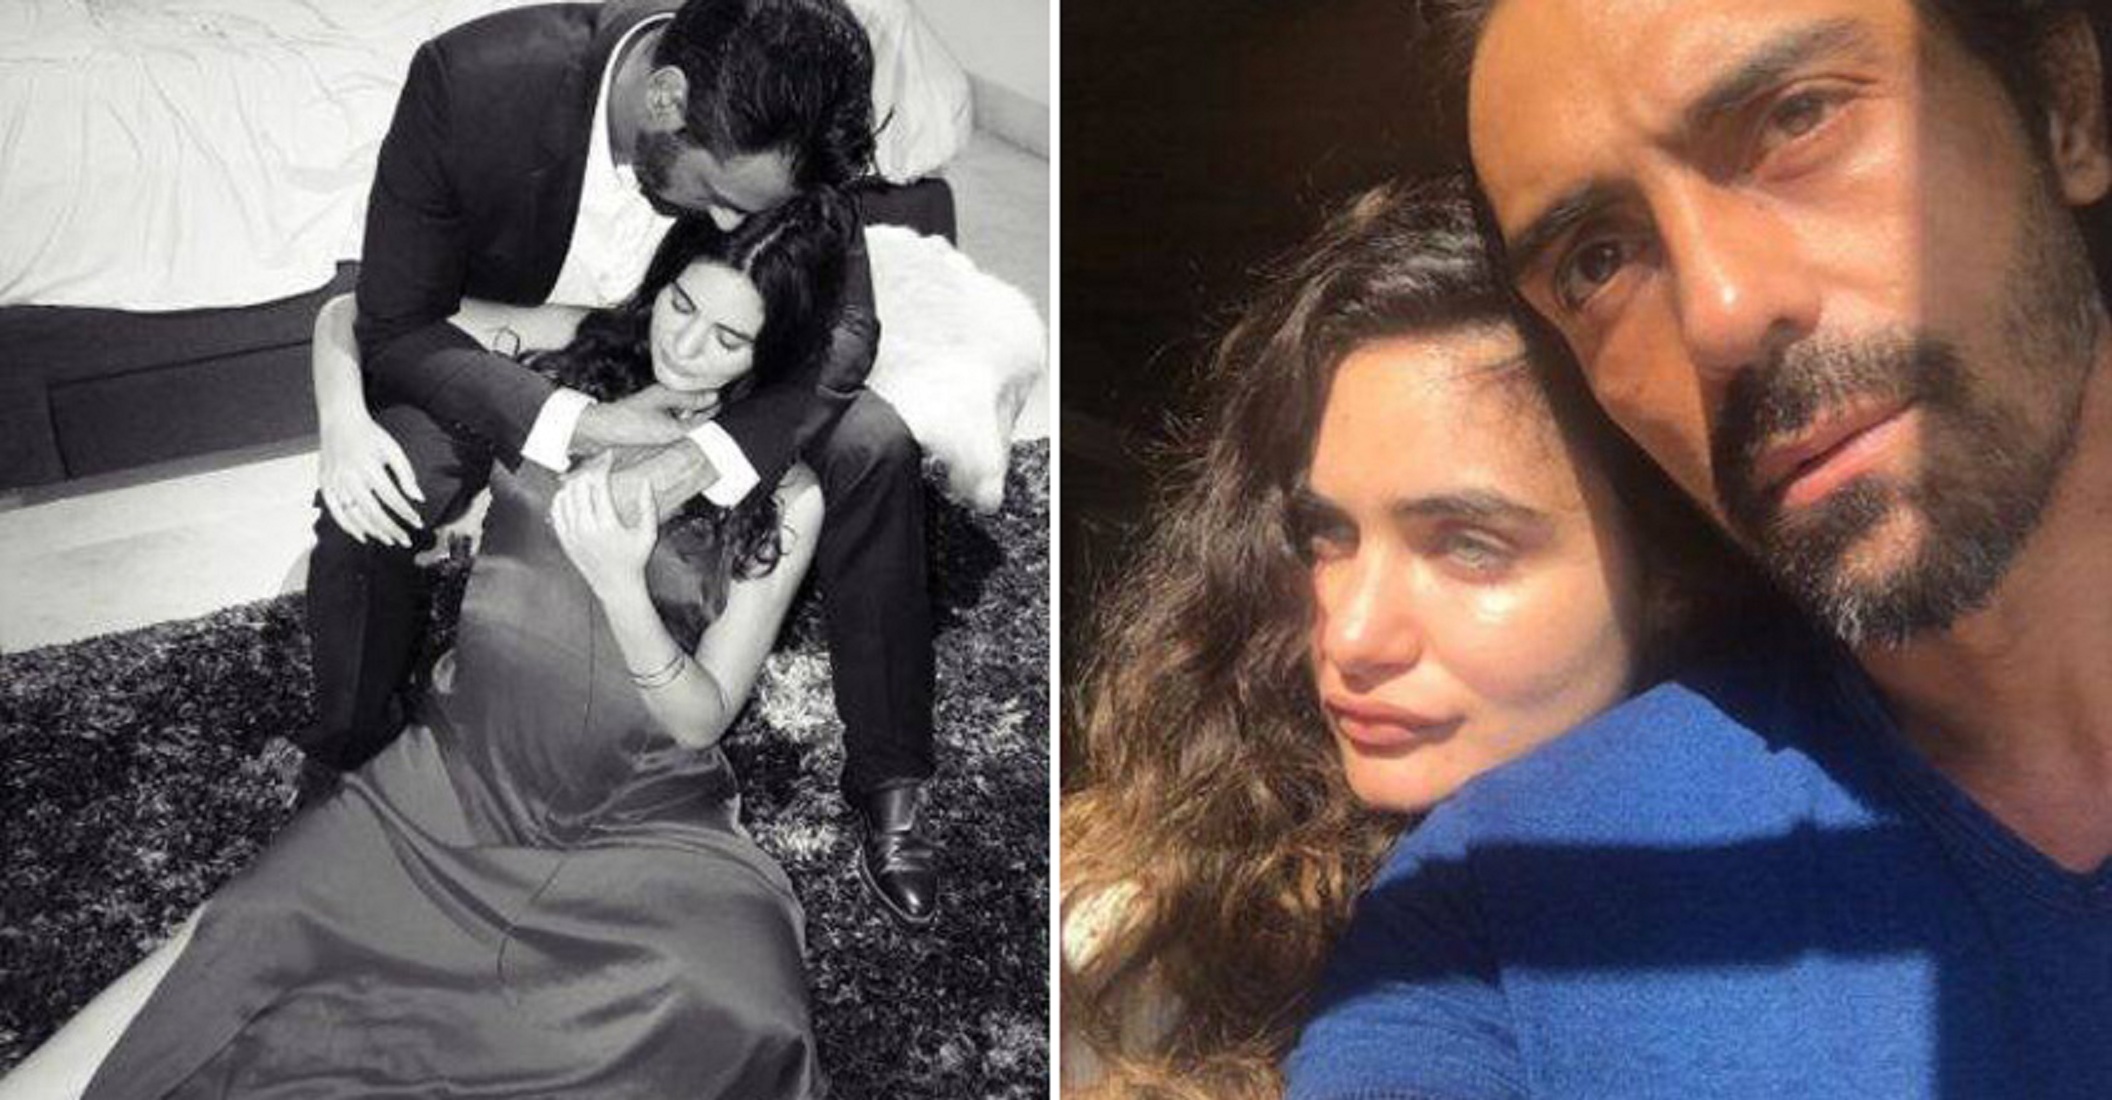 Arjun Rampal’s Girlfriend Expecting Child, Couple Announces Pregnancy In Heartwarming Post